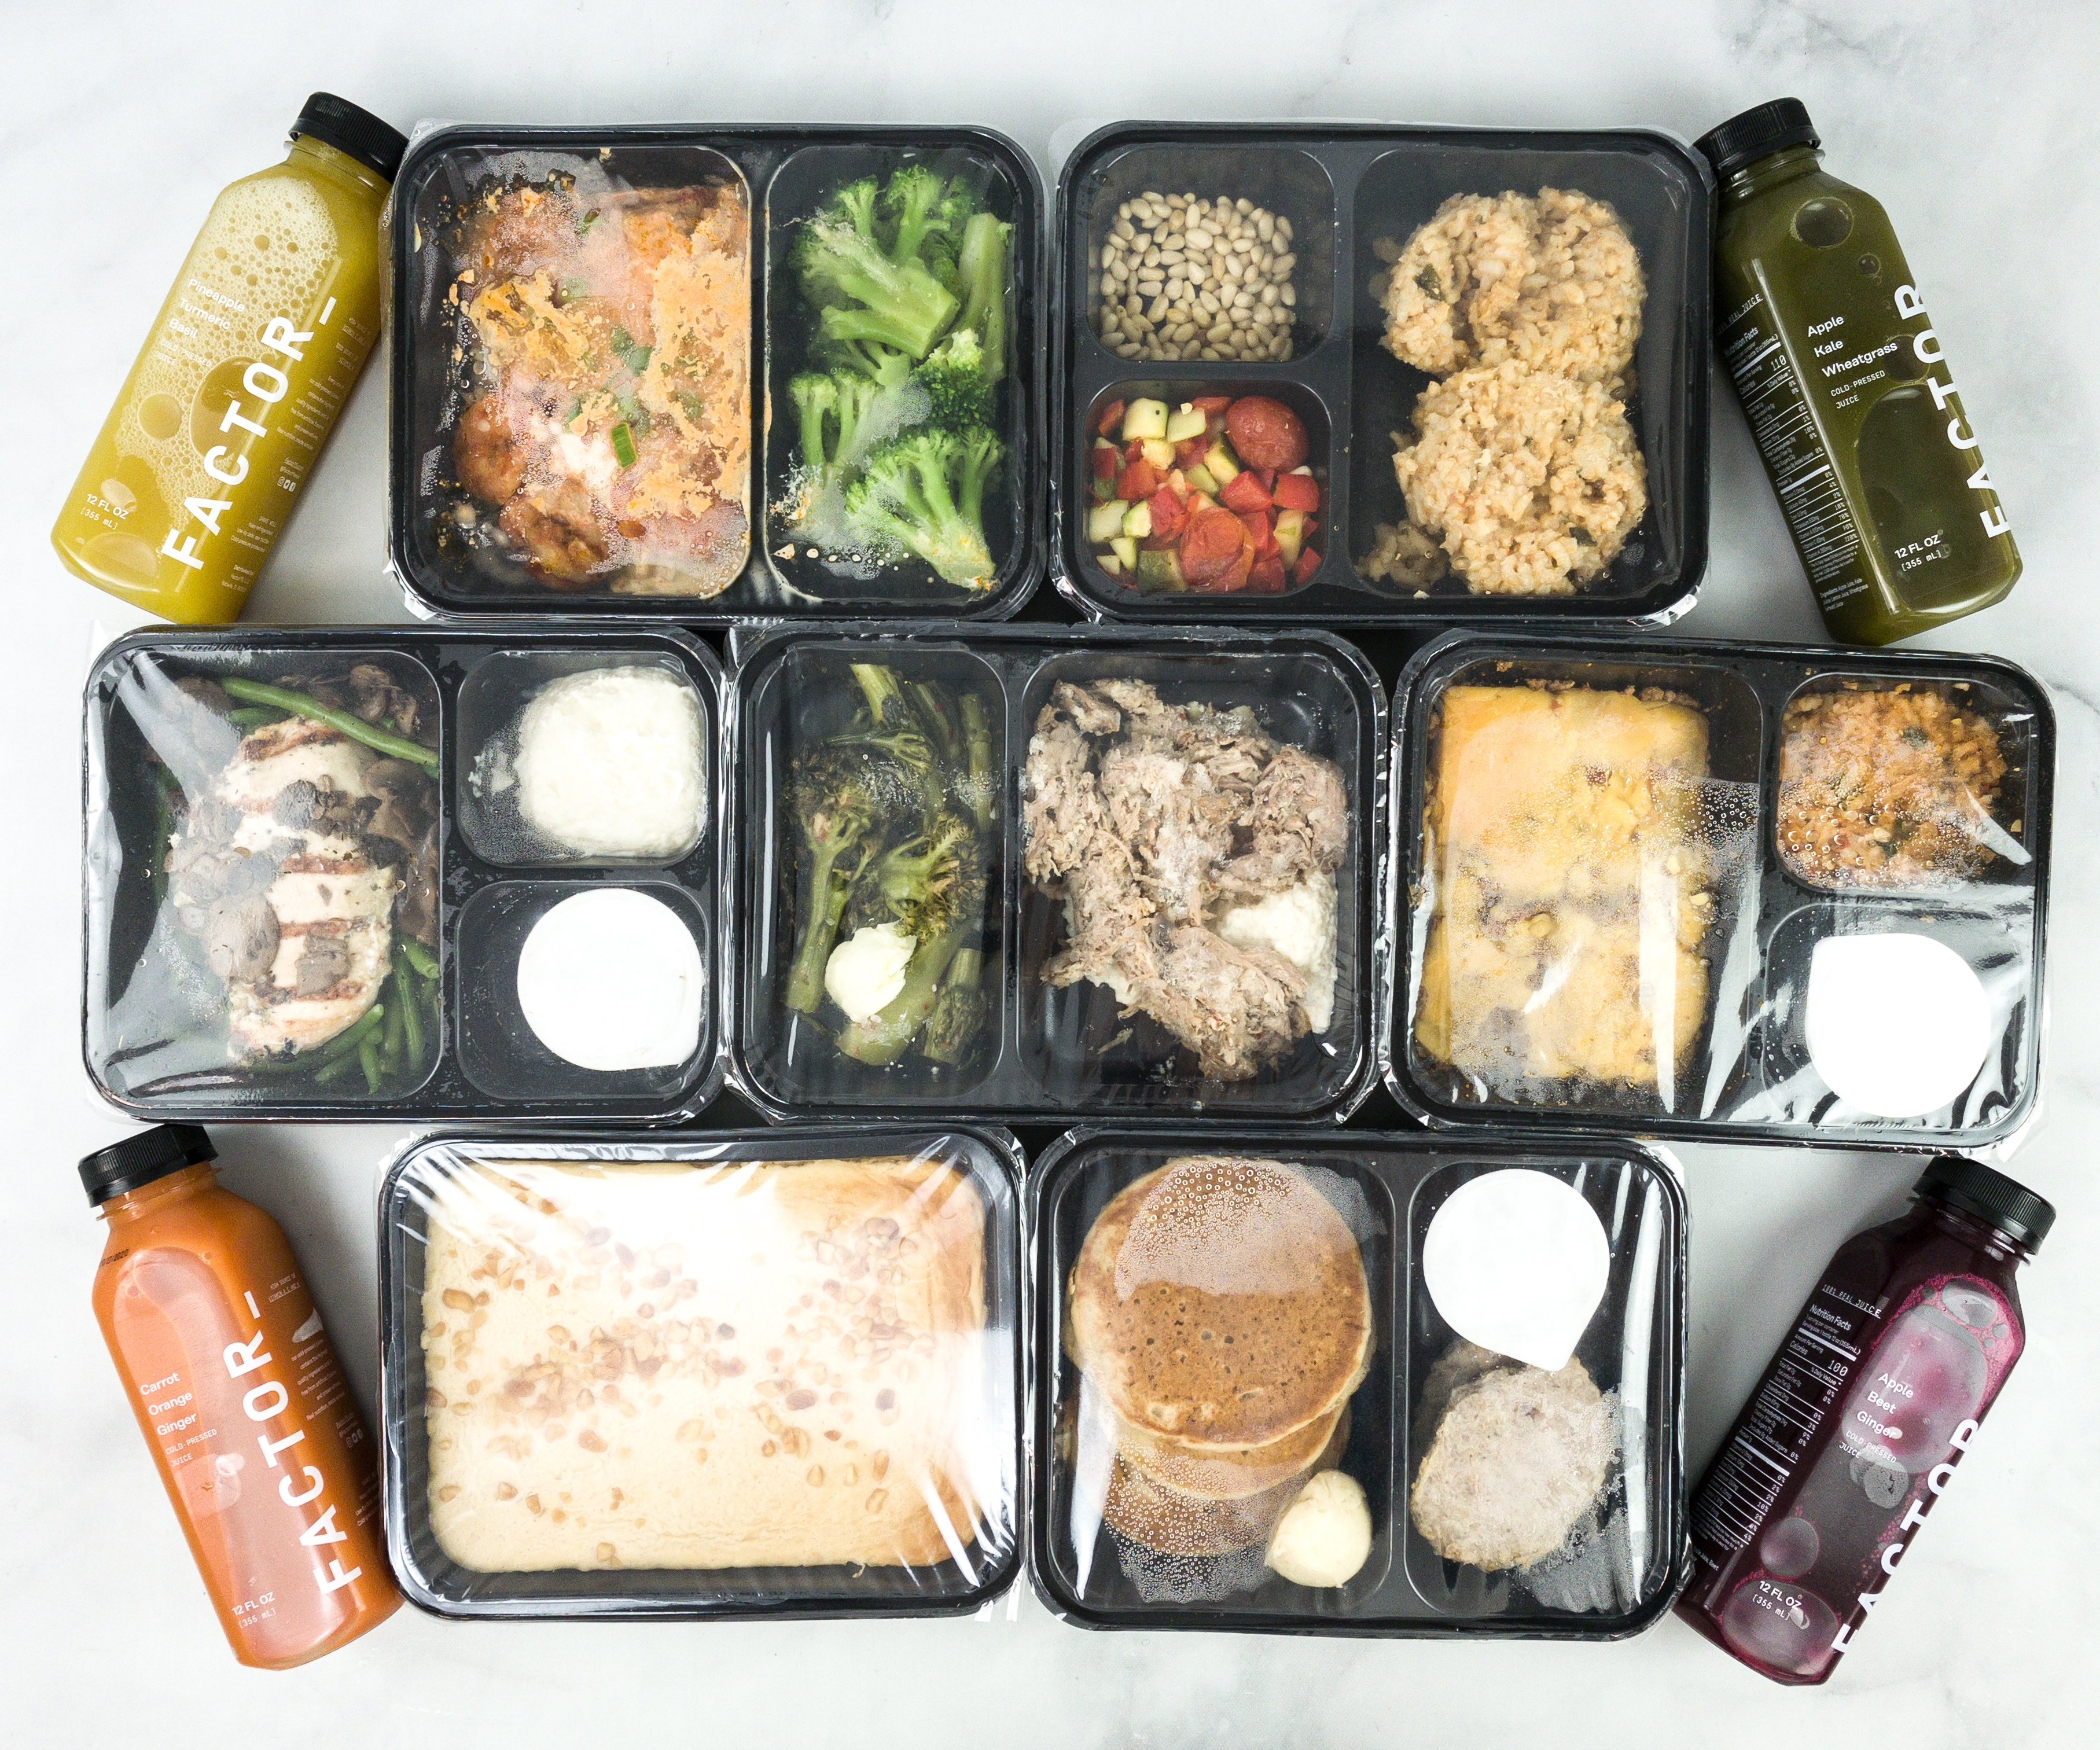 Factor meal kits: Get your first delivery for 50% off right now - Reviewed